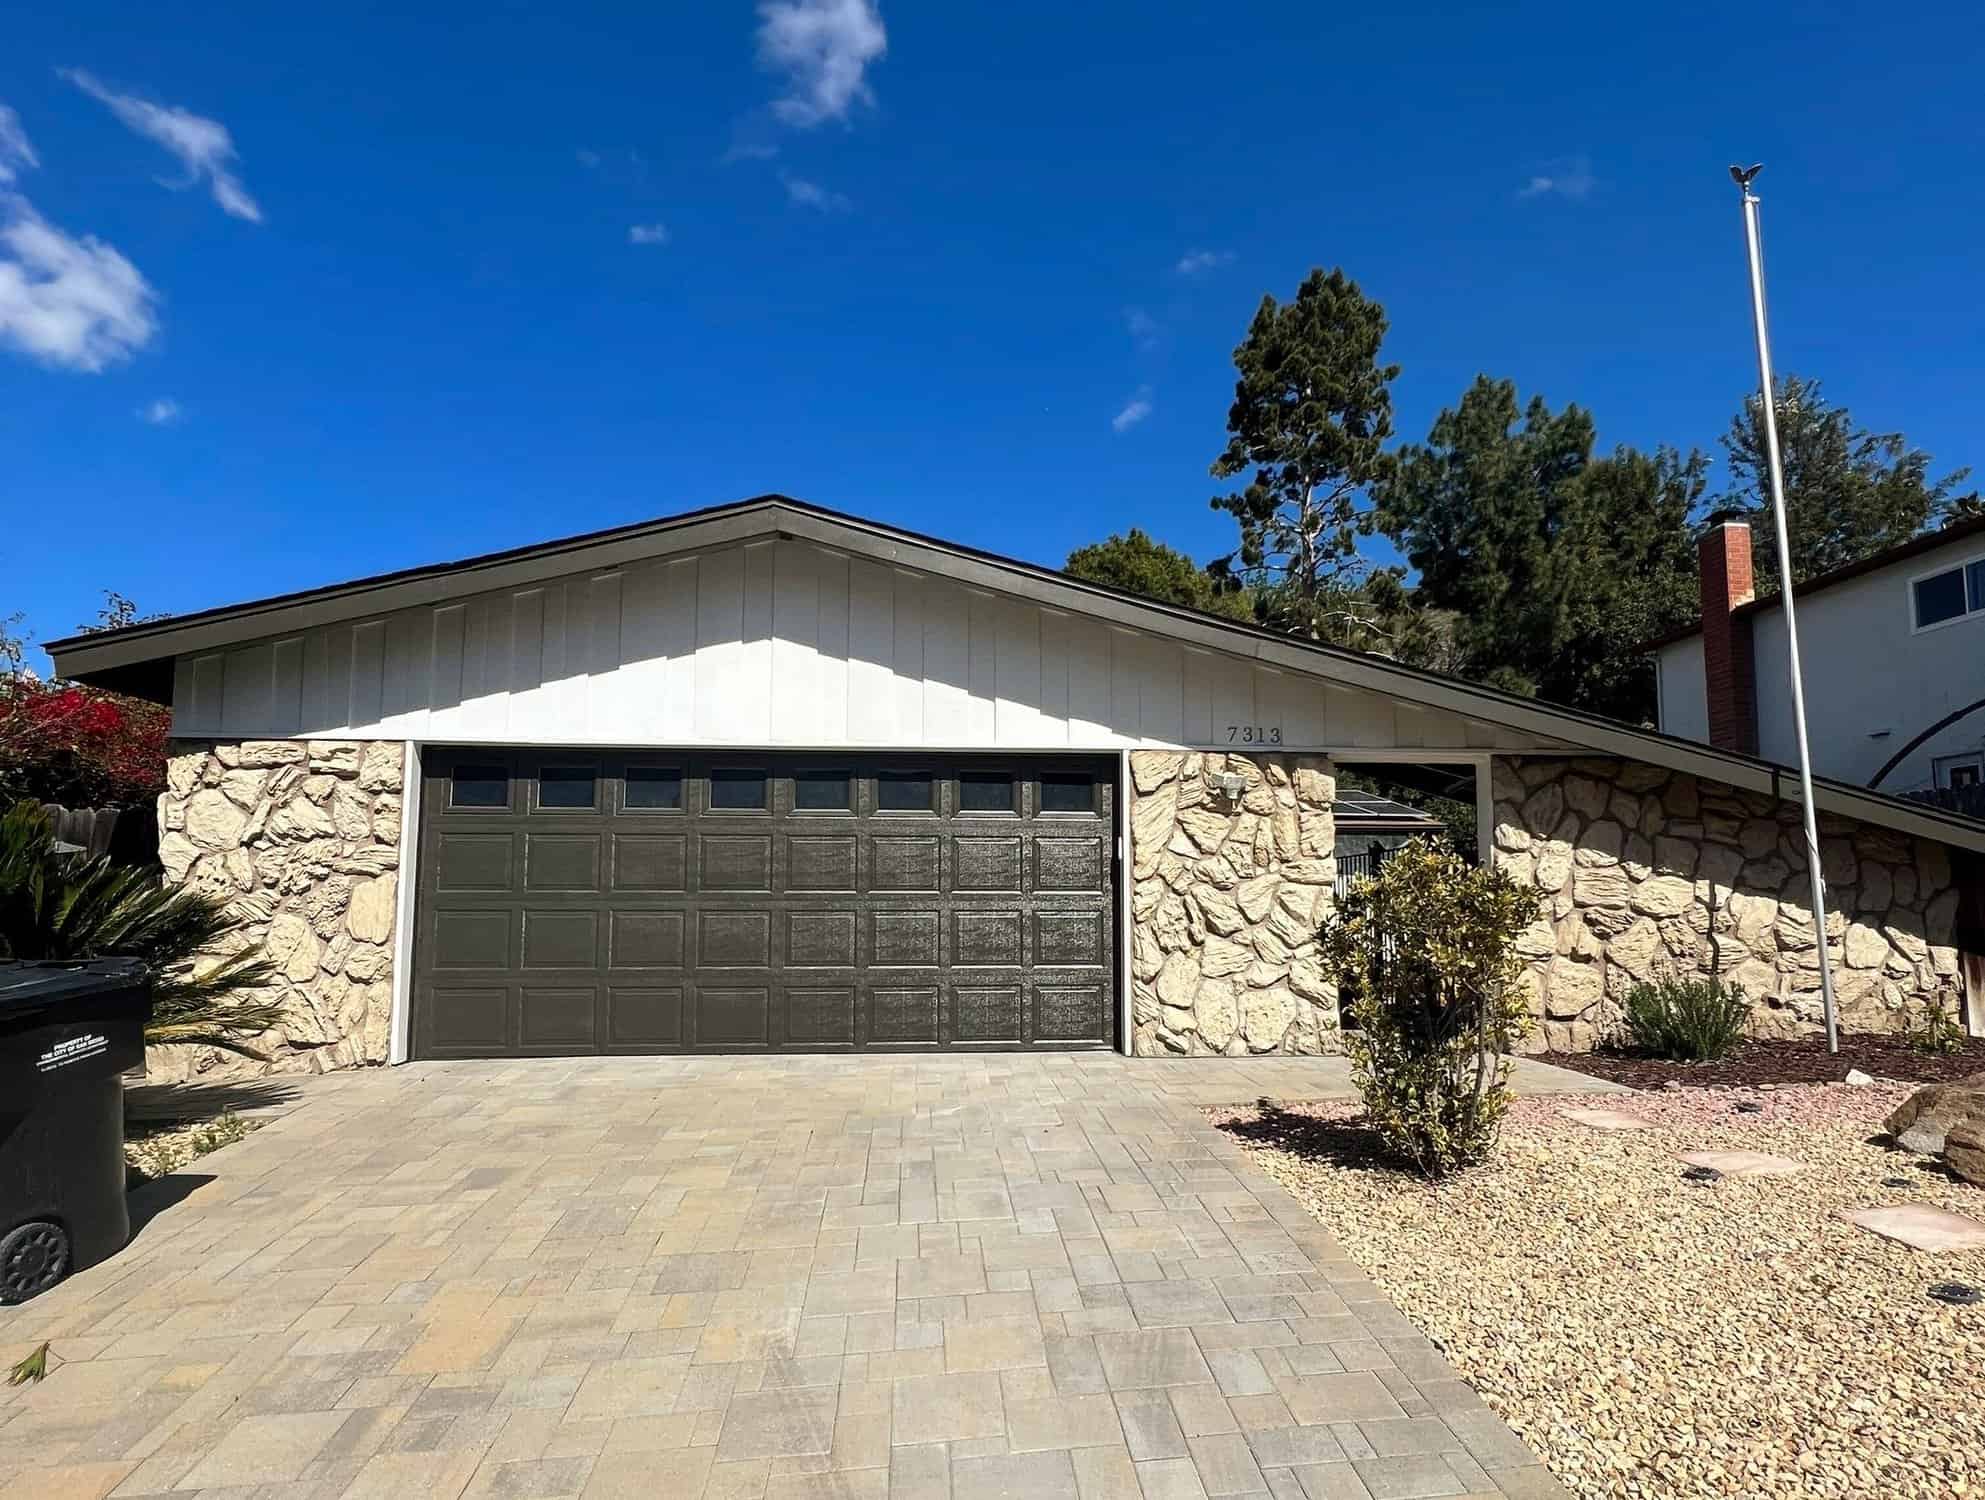 A House with Newly Painted Garage- Garage Painters in San Diego